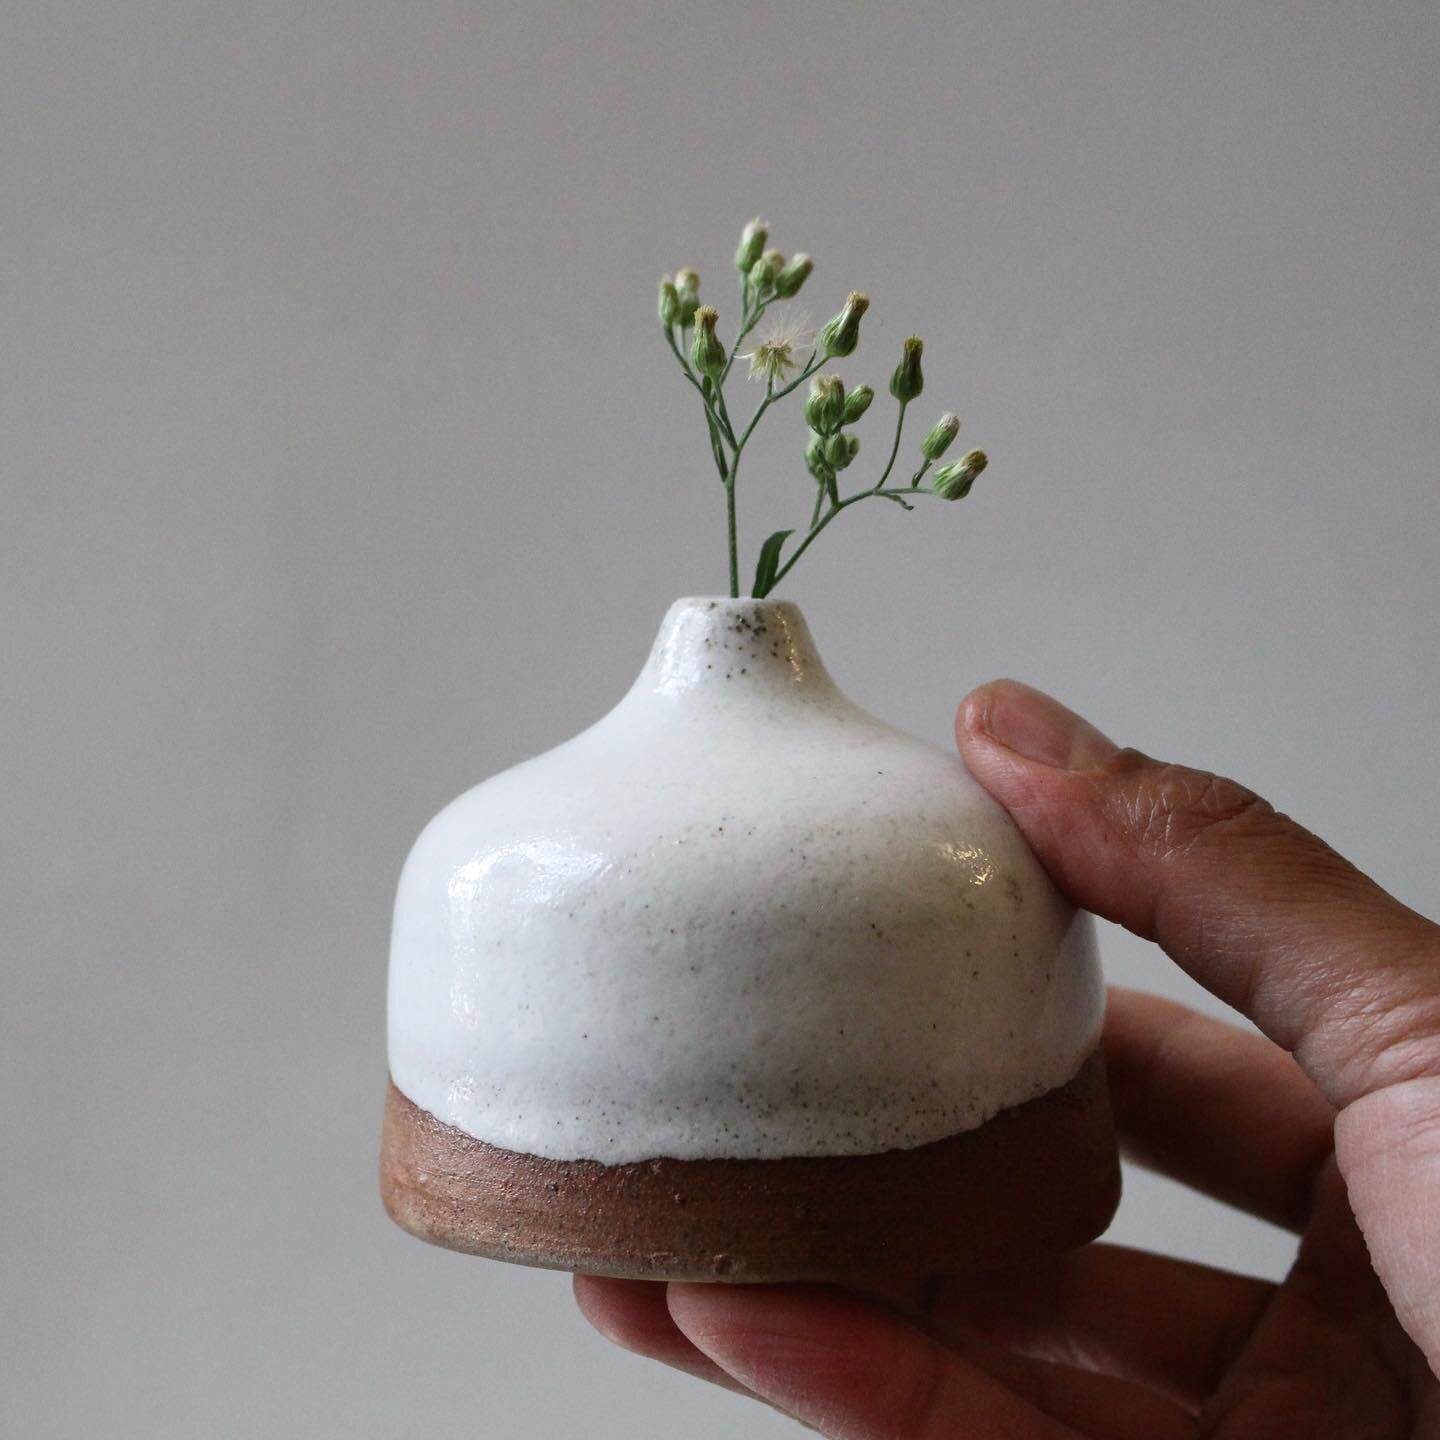 Throwback to my first wild clay bud vase. This is the only piece that has survived with a glaze over the of the found clay. 

I have since had a number of wild clay pots crack under the stress of my new glazes. 

I might revisit glazing these pieces 